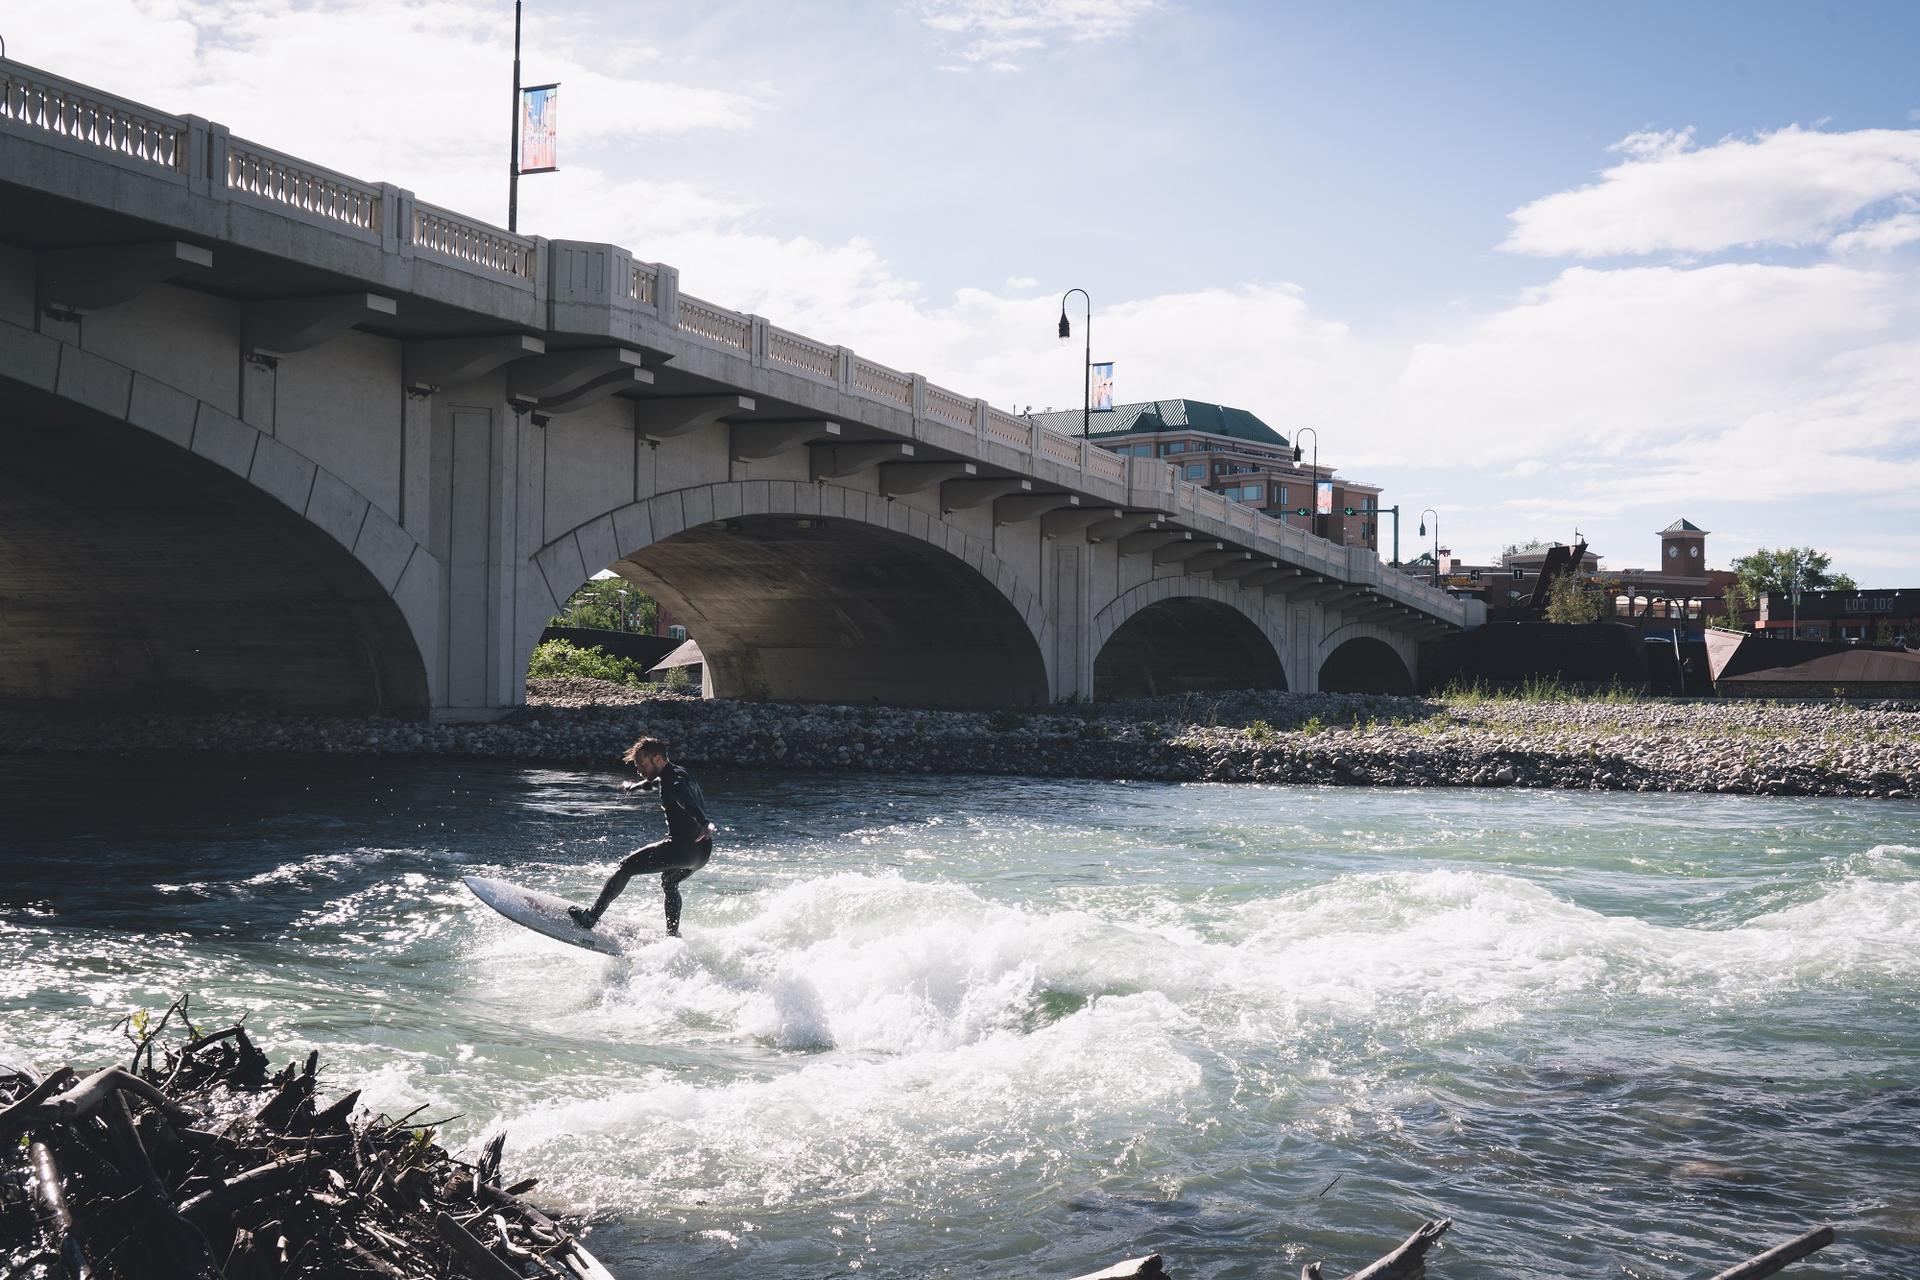 River surfing on the Bow River by the 10th Street bridge in Calgary